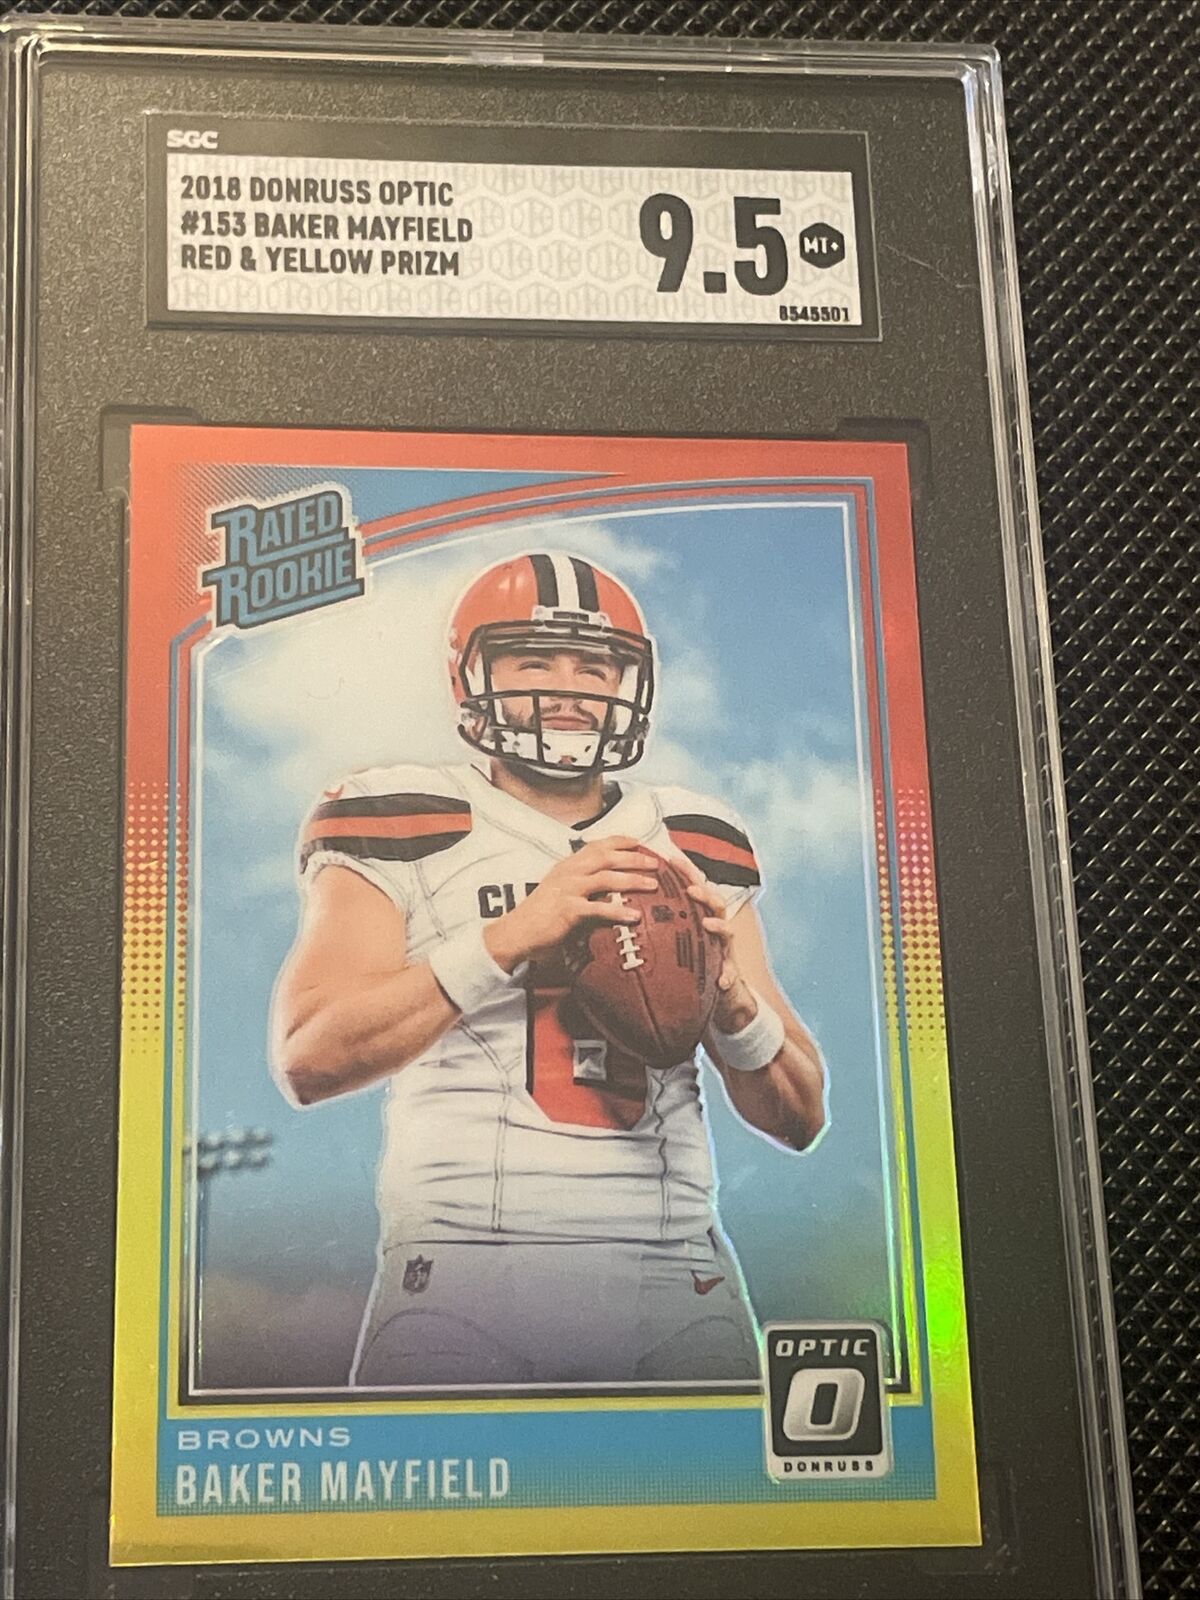 2018 Donruss Optic Red Yellow Prizm Baker Mayfield Rated Rookie RC SGC 9.5 Mint+